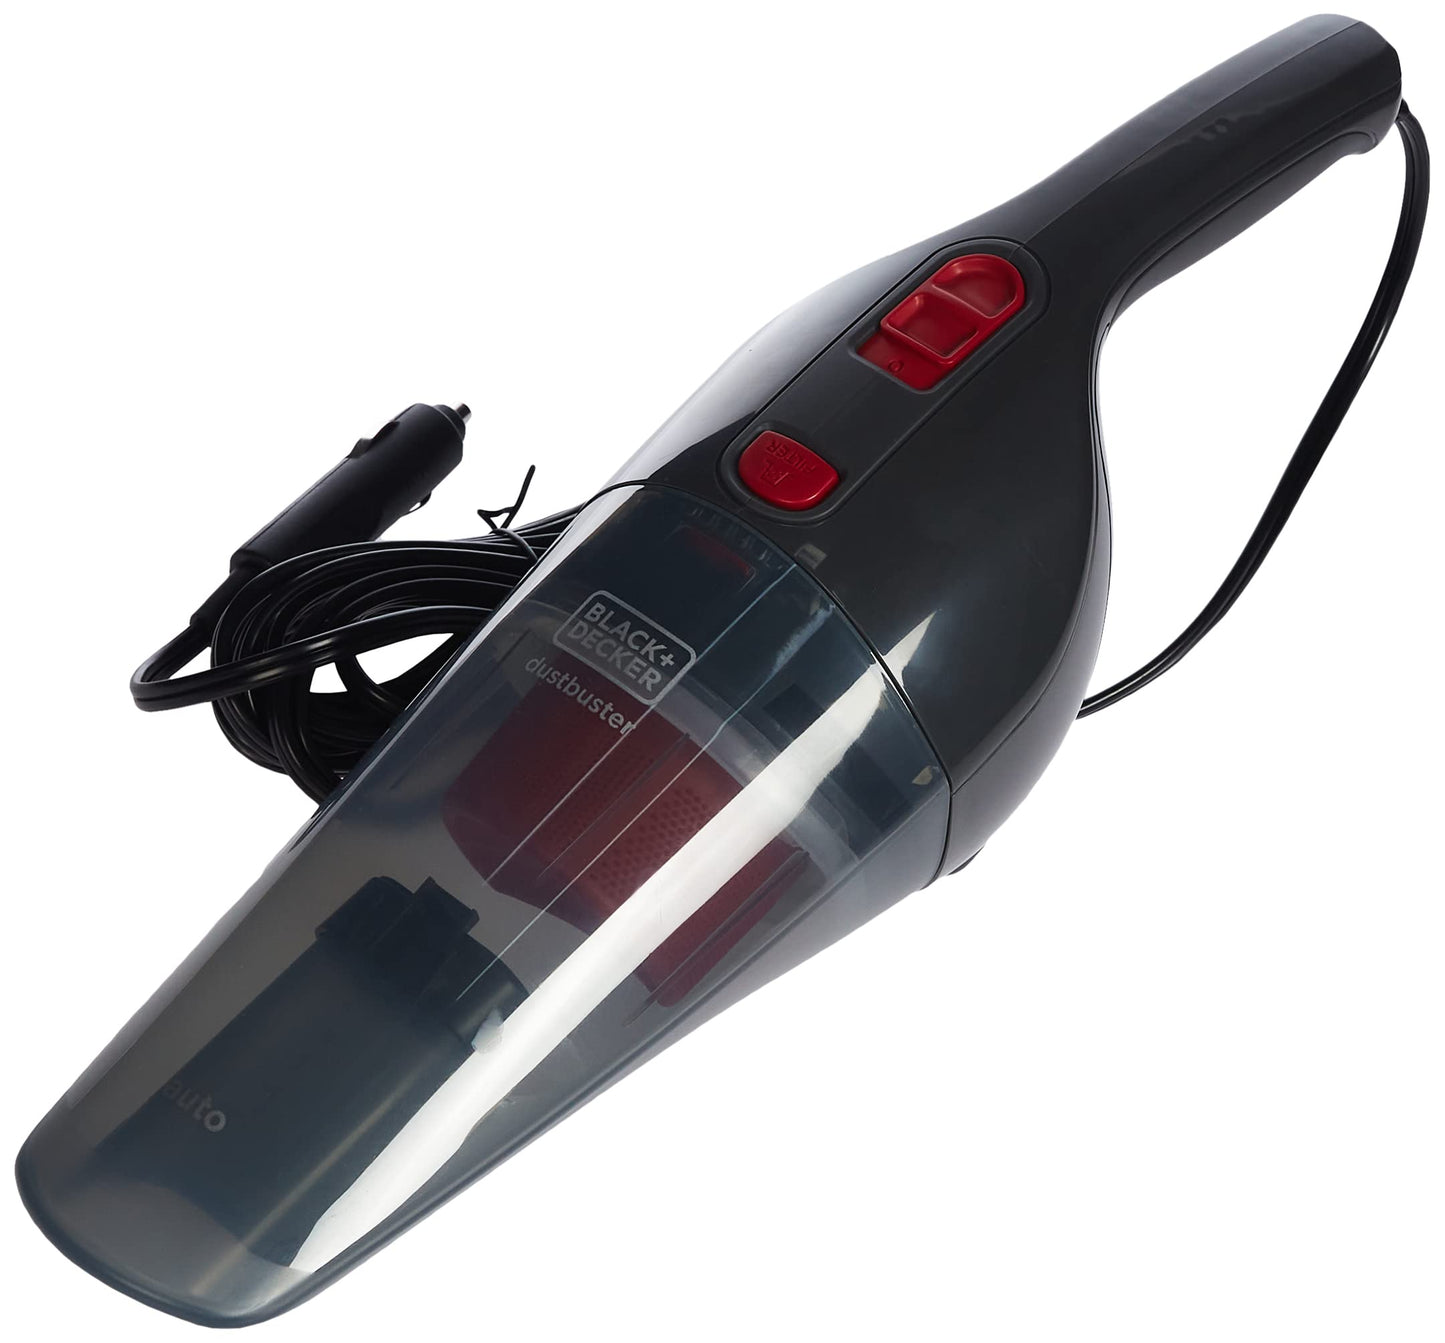 BLACK+DECKER 12V DC Auto Dustbuster Handheld Car Vacuum with 6 Pieces Accessories for Car, Red/Grey - NV1210AV,